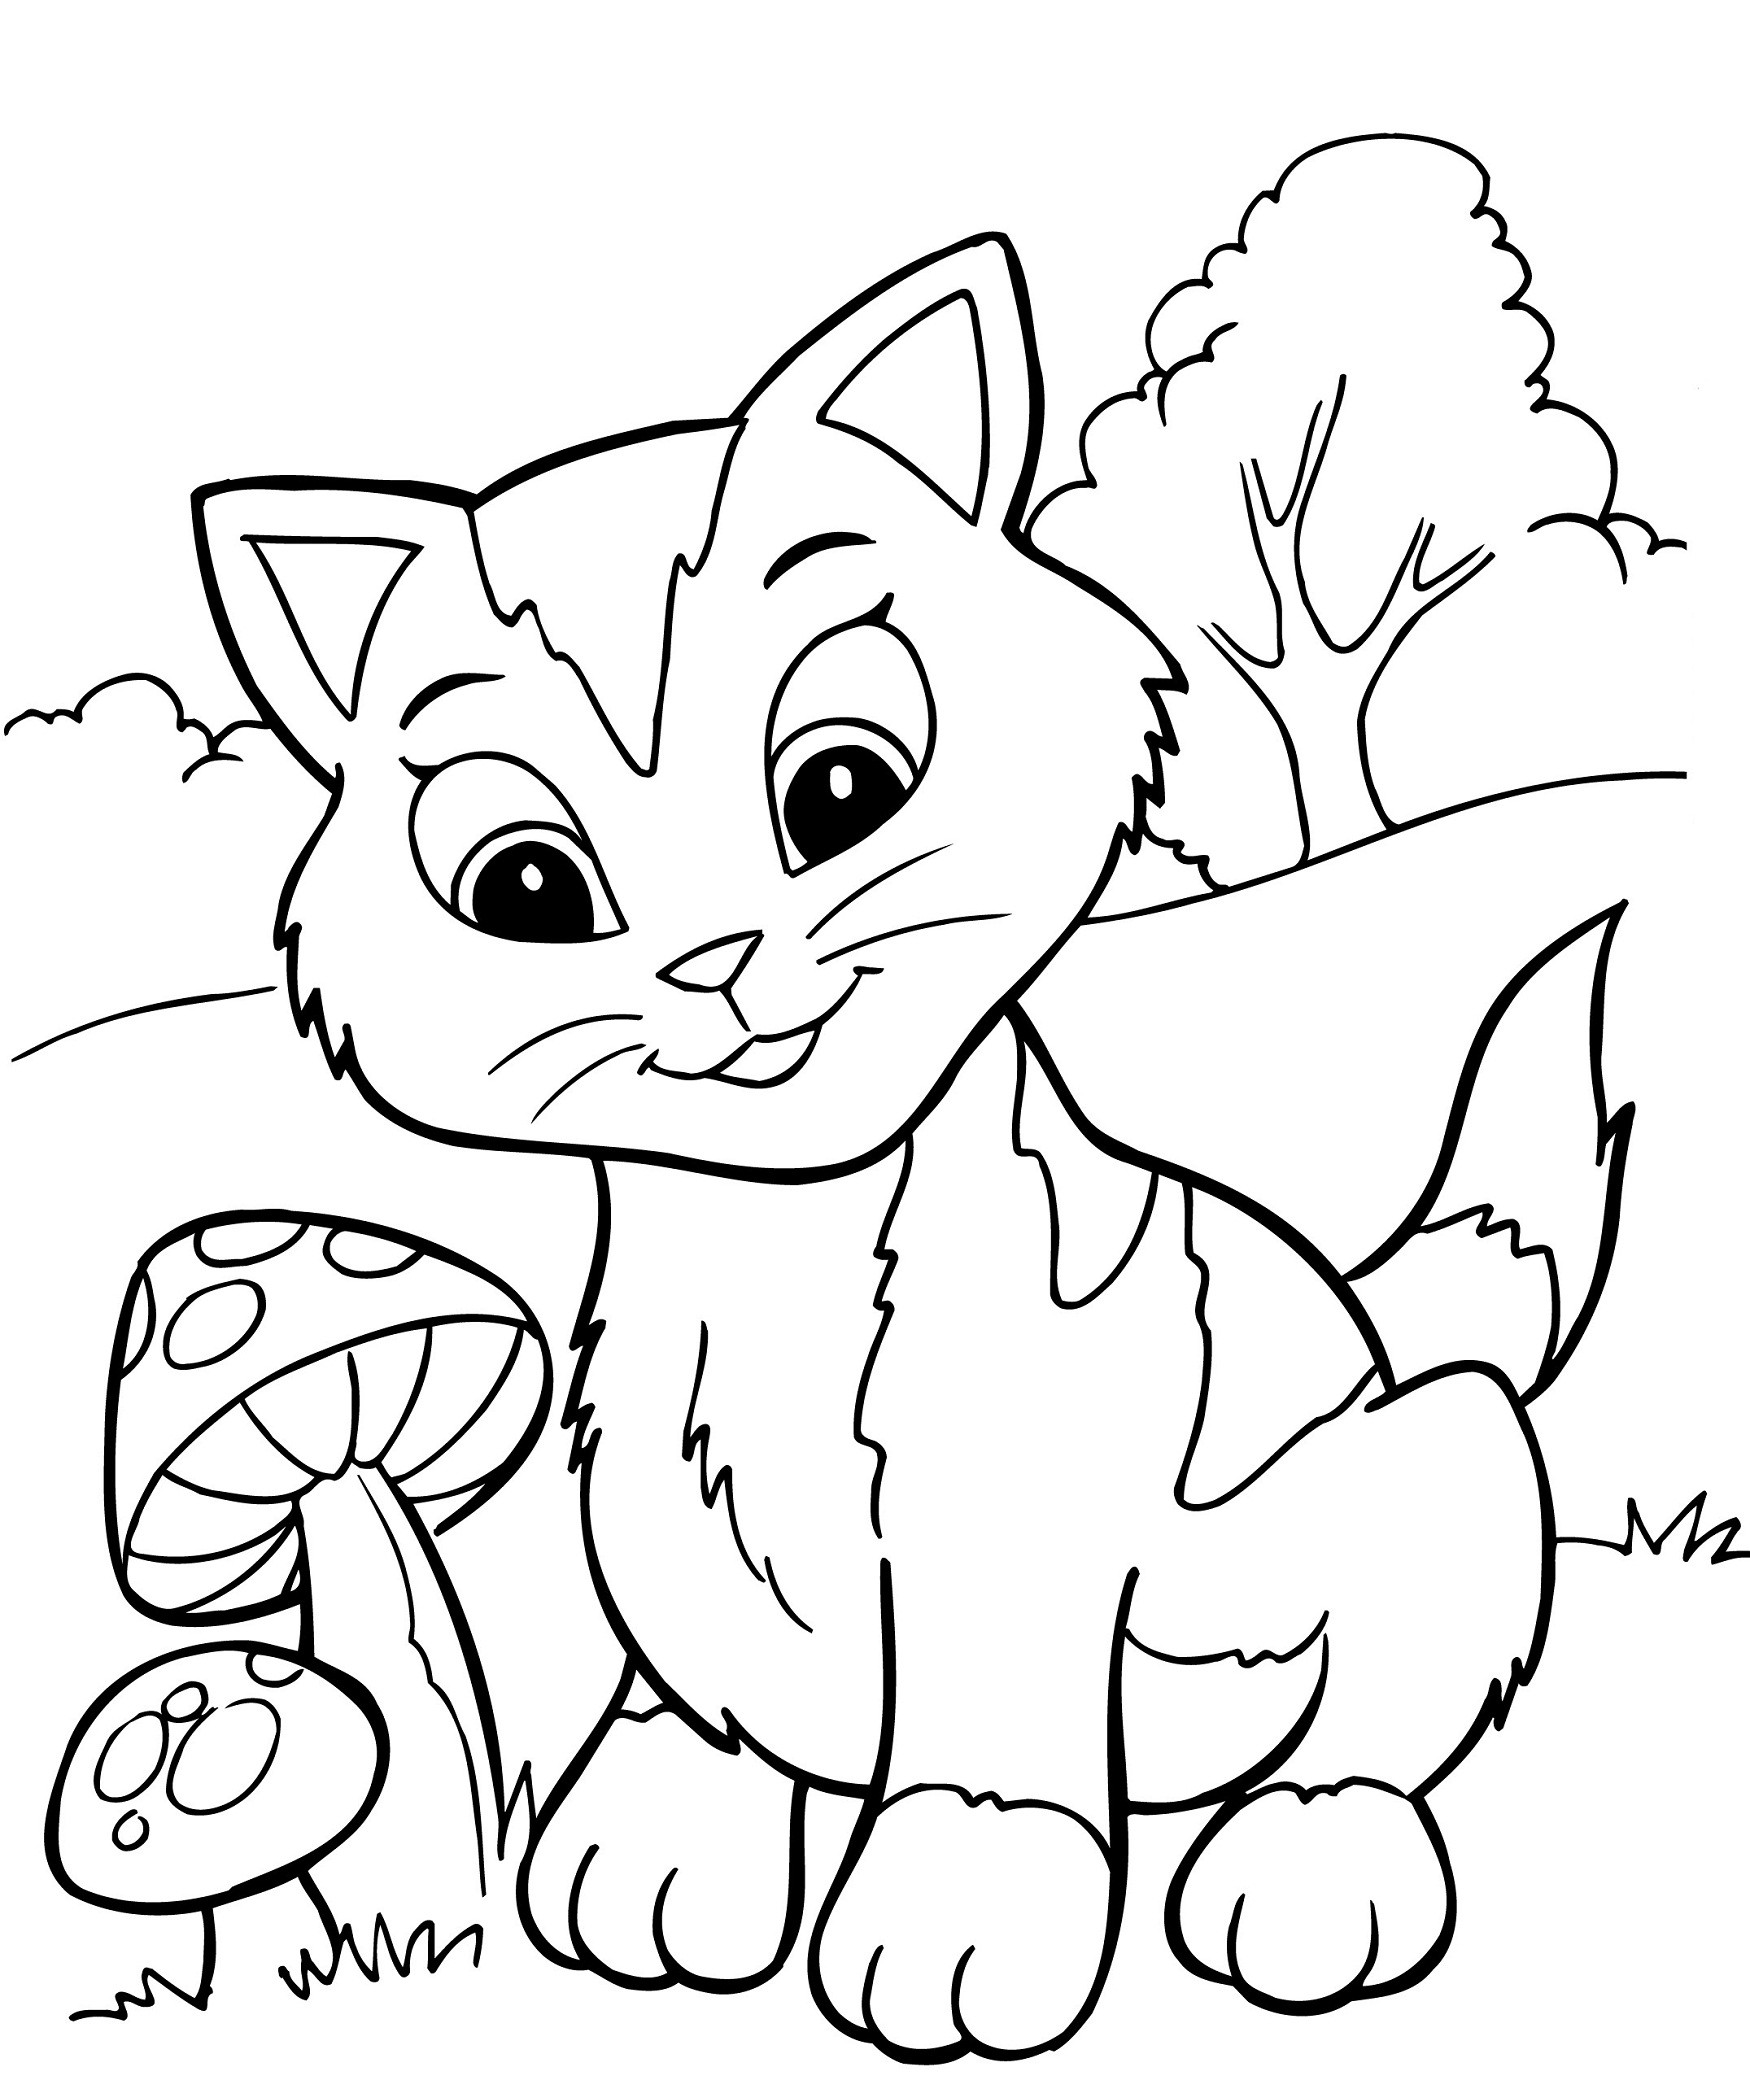 Pdf Coloring Pages For Kids
 Printable Coloring Book Pages for Kids Gallery